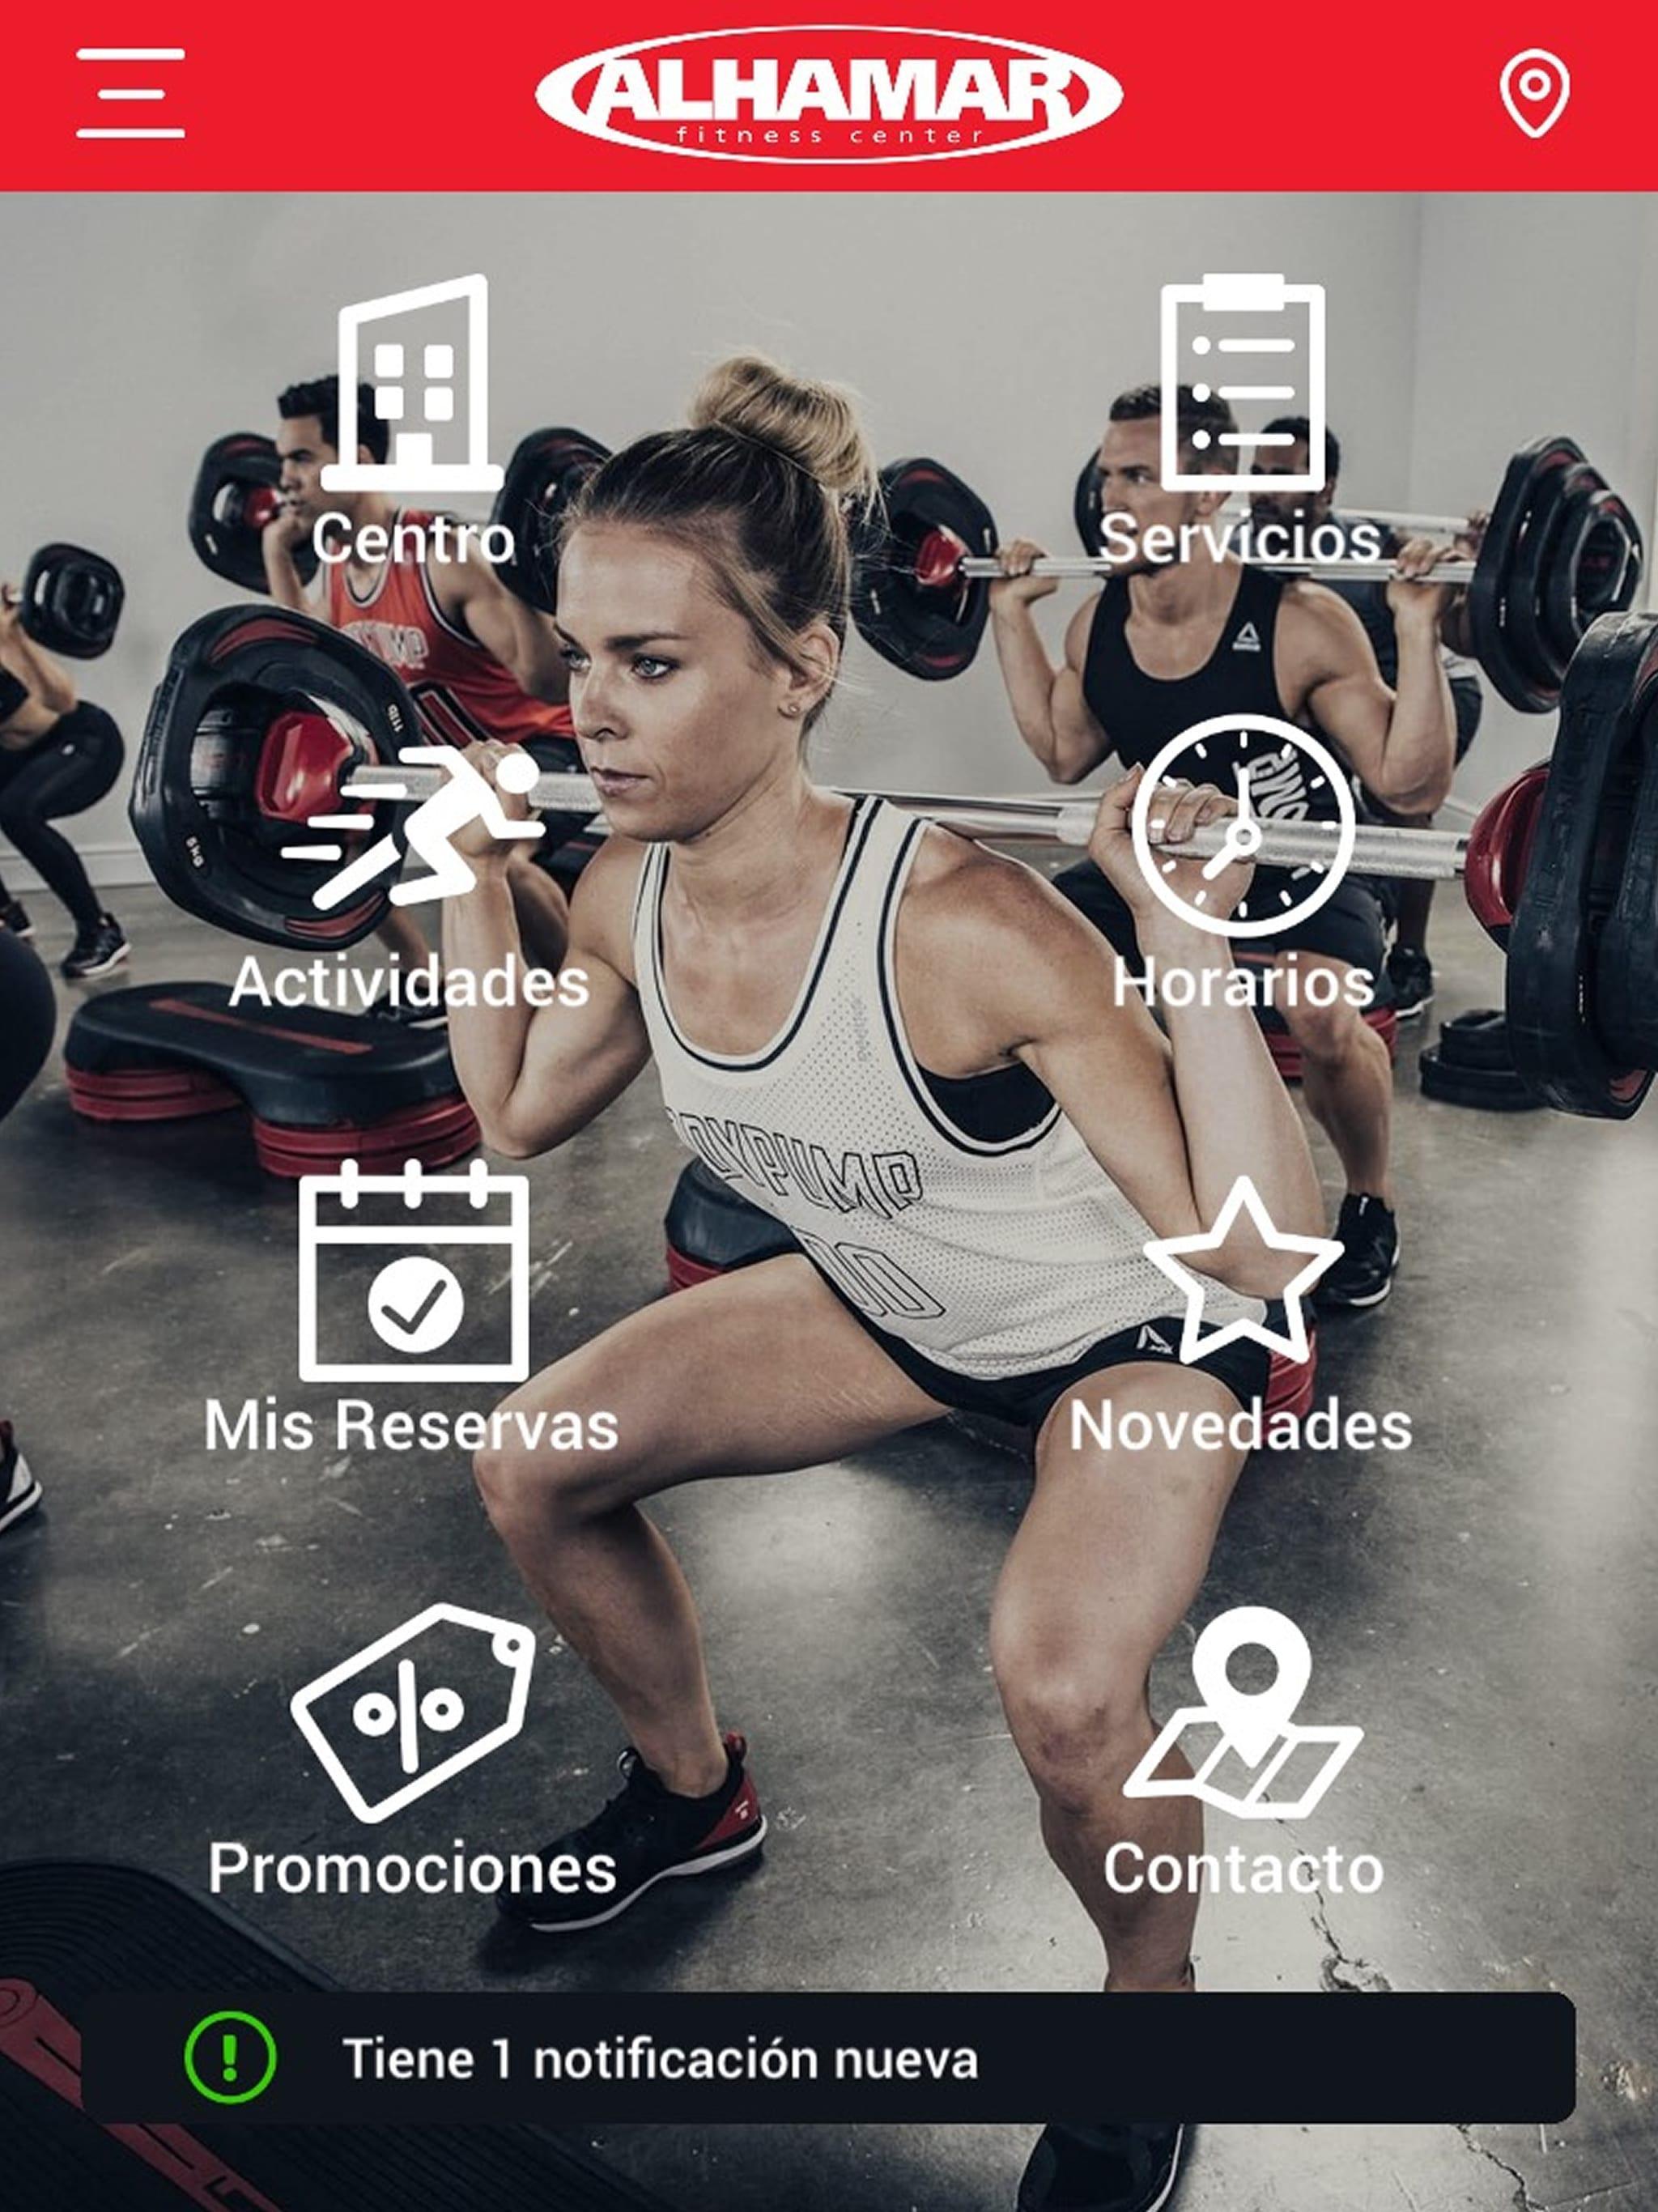 Alhamar Fitness Center for Android - APK Download